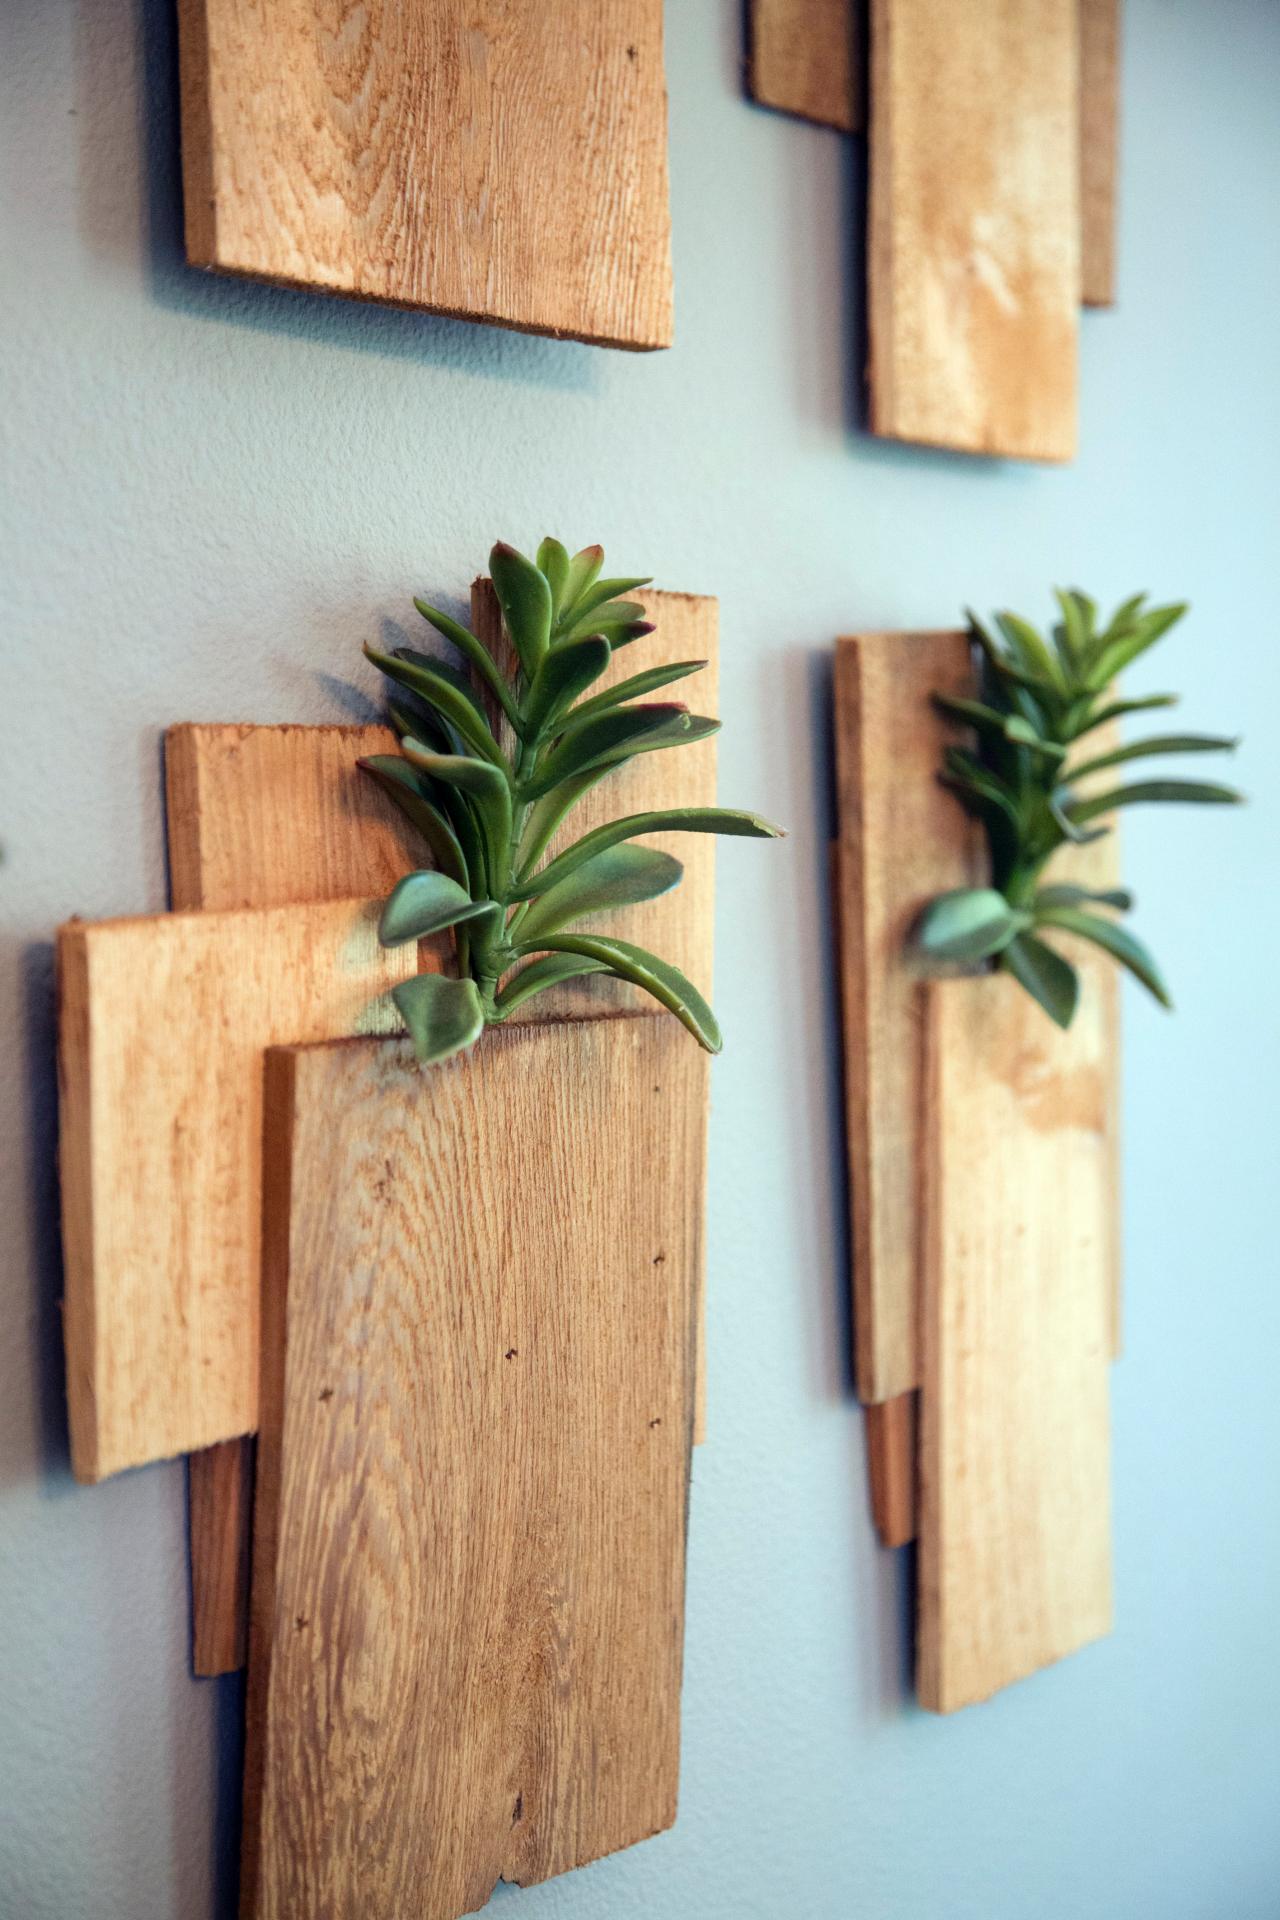 Wood Planks and Succulents as Wall Decor